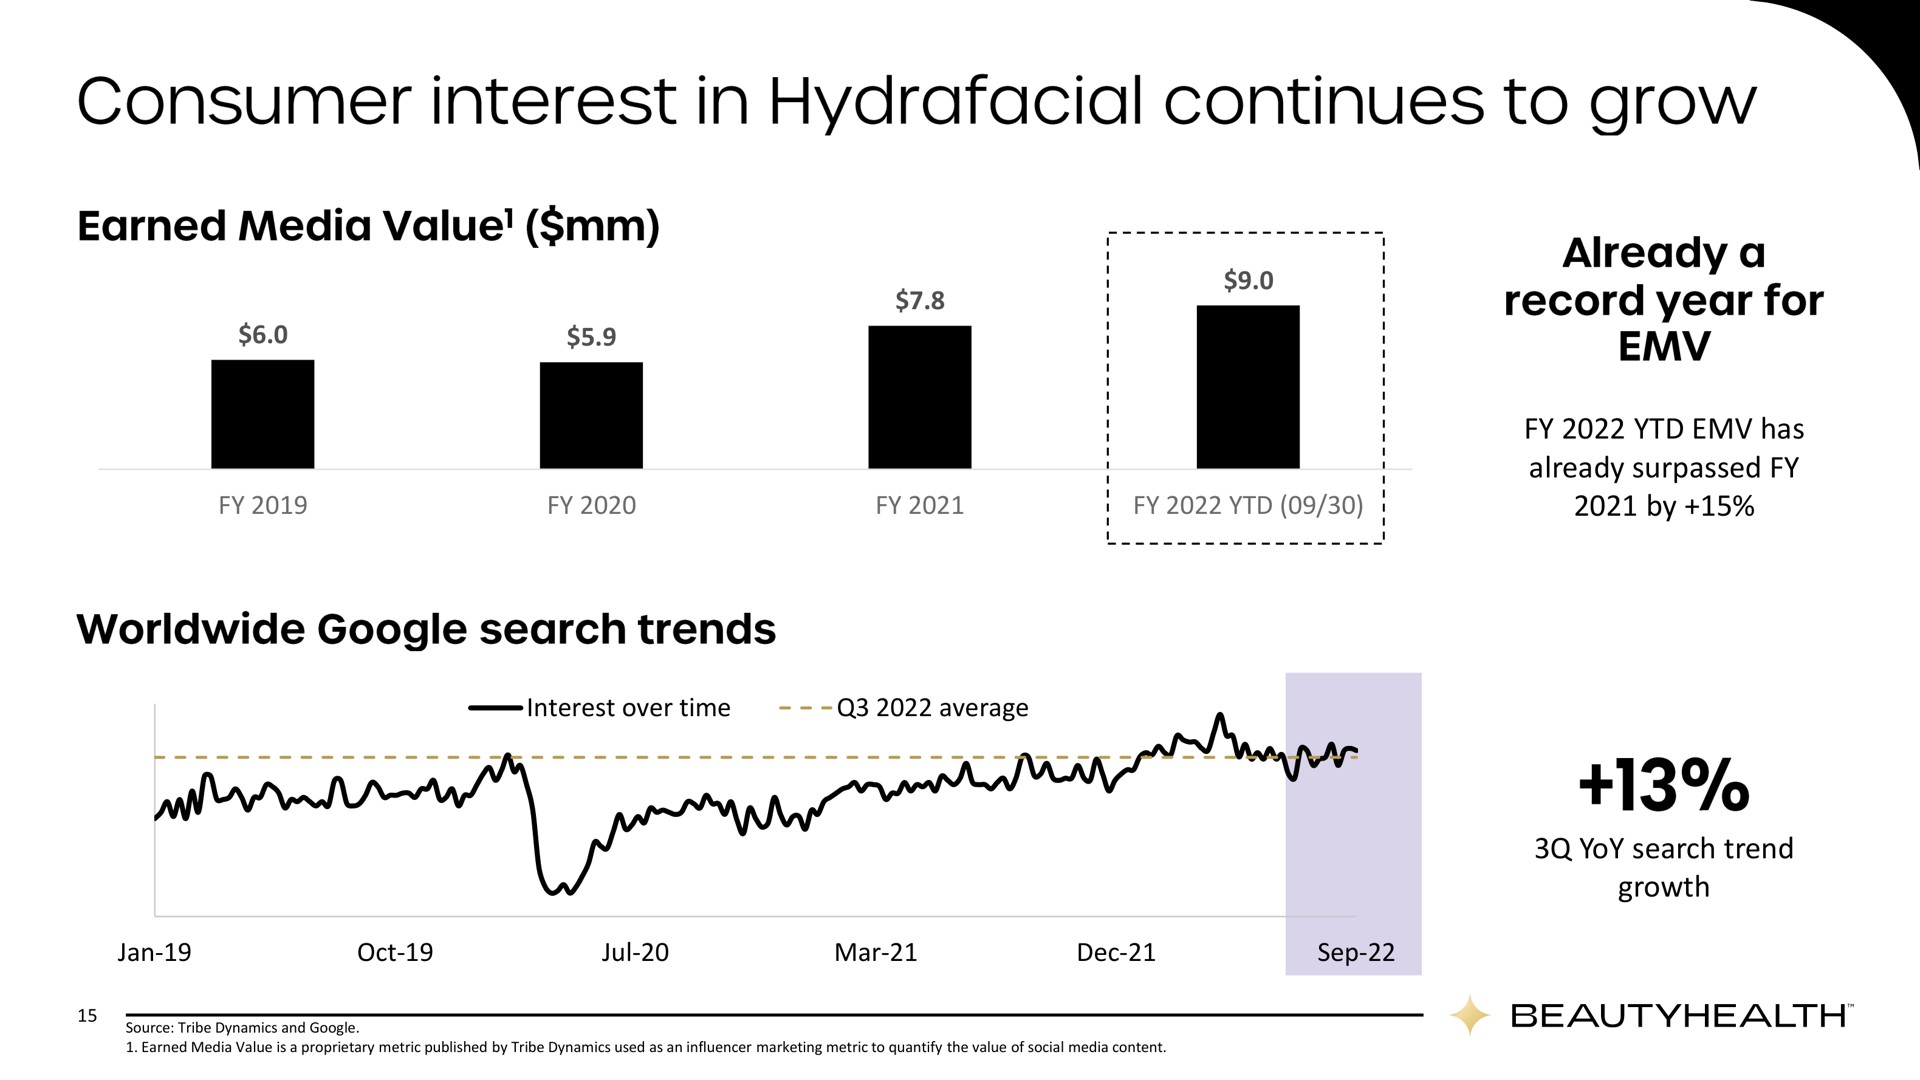 interest over time average has already surpassed by yoy search trend growth mar consumer in continues to grow | Hydrafacial